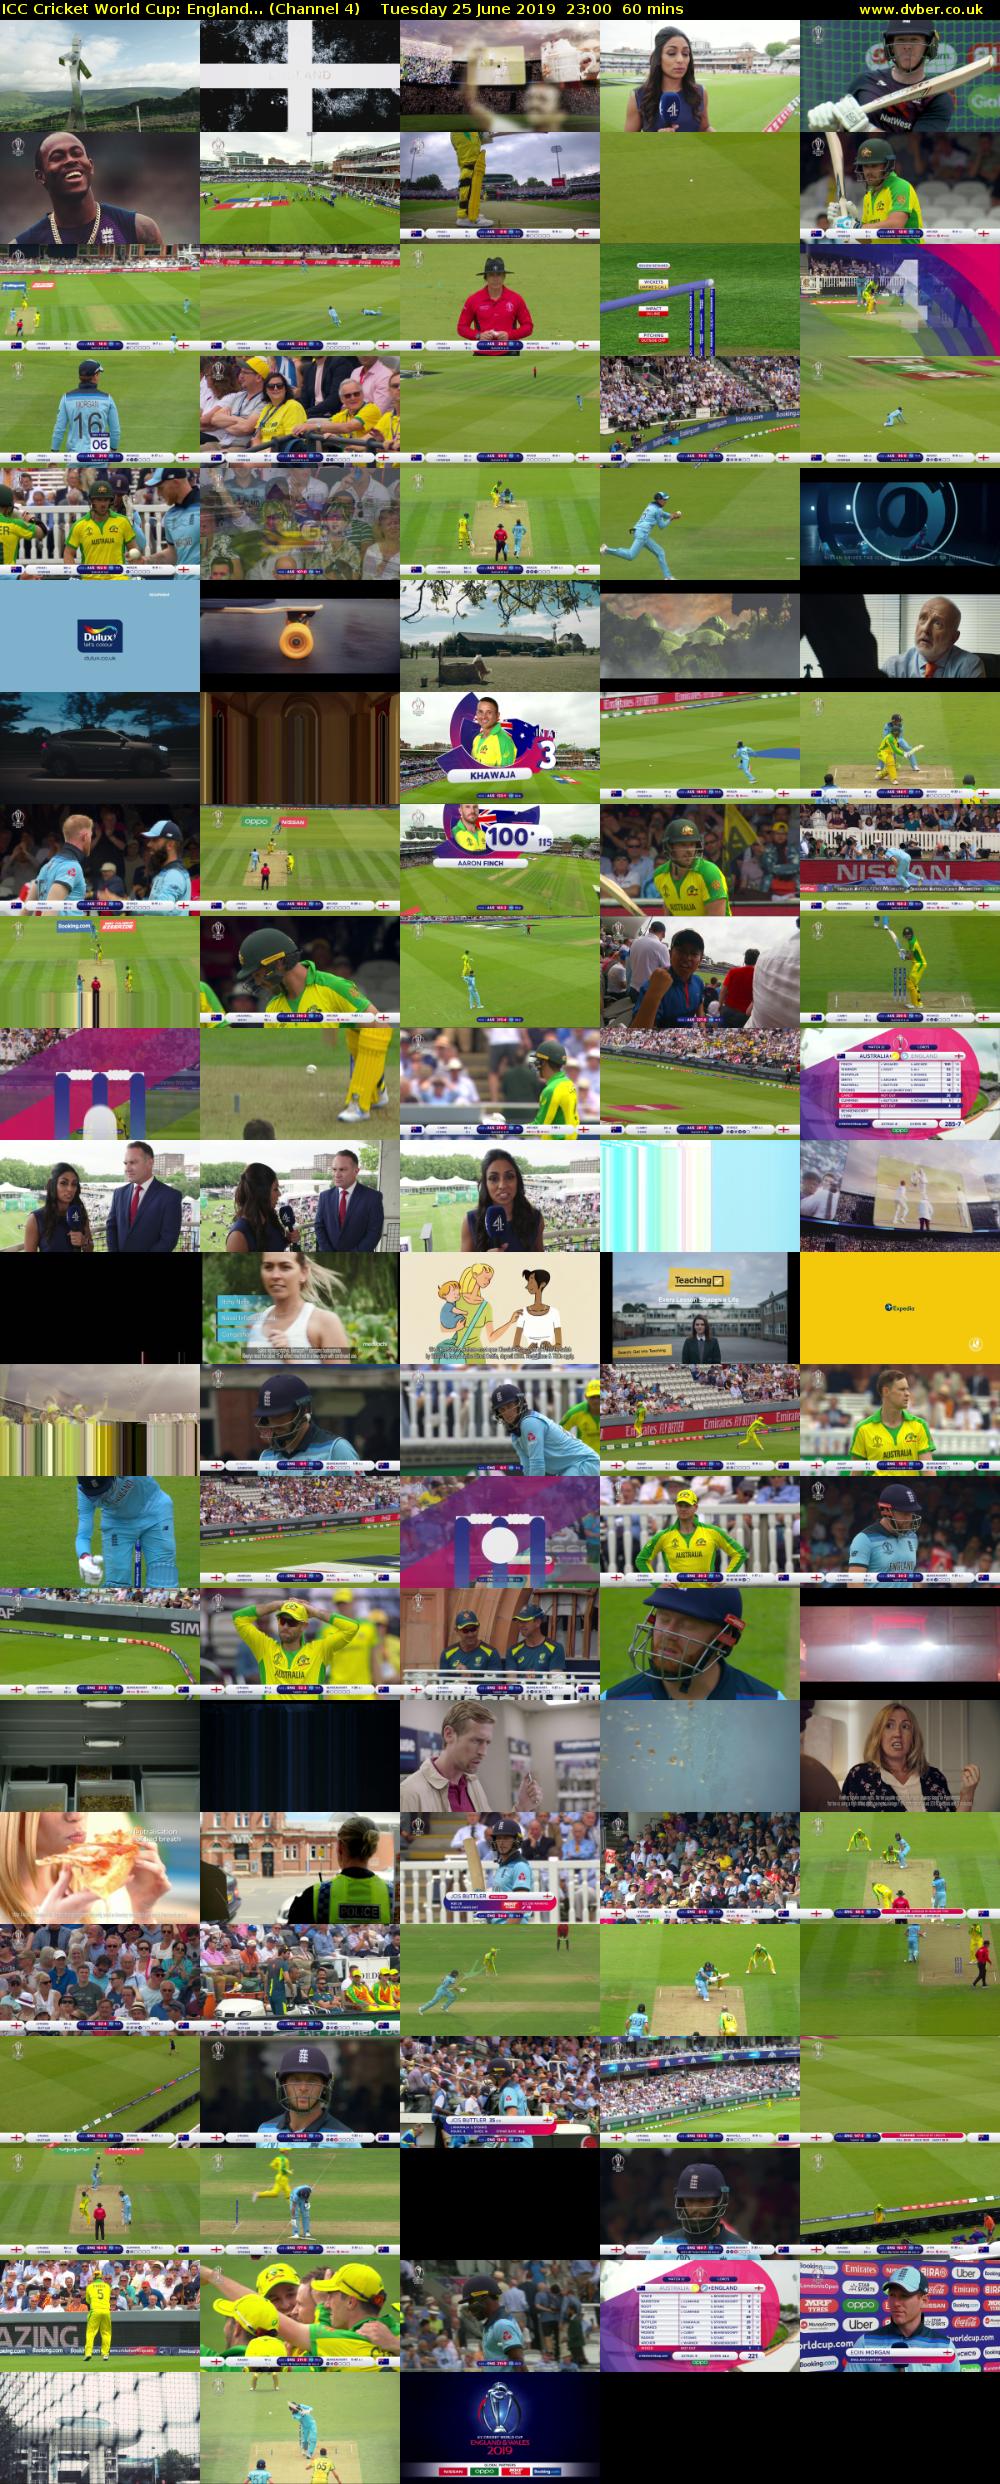 ICC Cricket World Cup: England... (Channel 4) Tuesday 25 June 2019 23:00 - 00:00